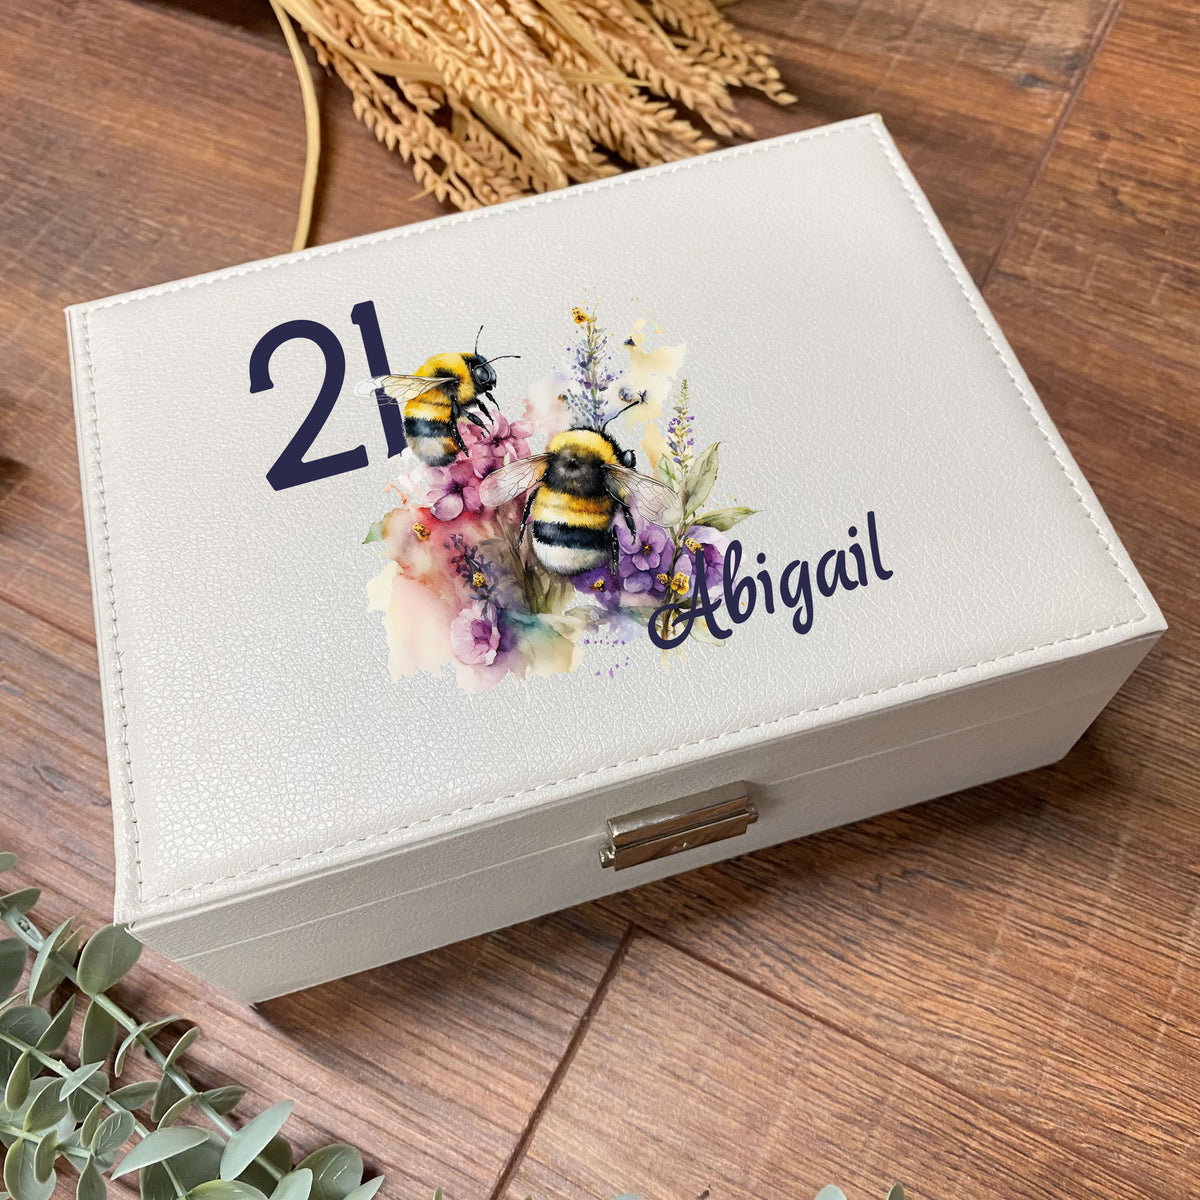 Personalised Any Age Birthday Large Jewellery Box Gift Bumble Bee Design 13th 16th 18th 21st 30th 40th 50th 60th